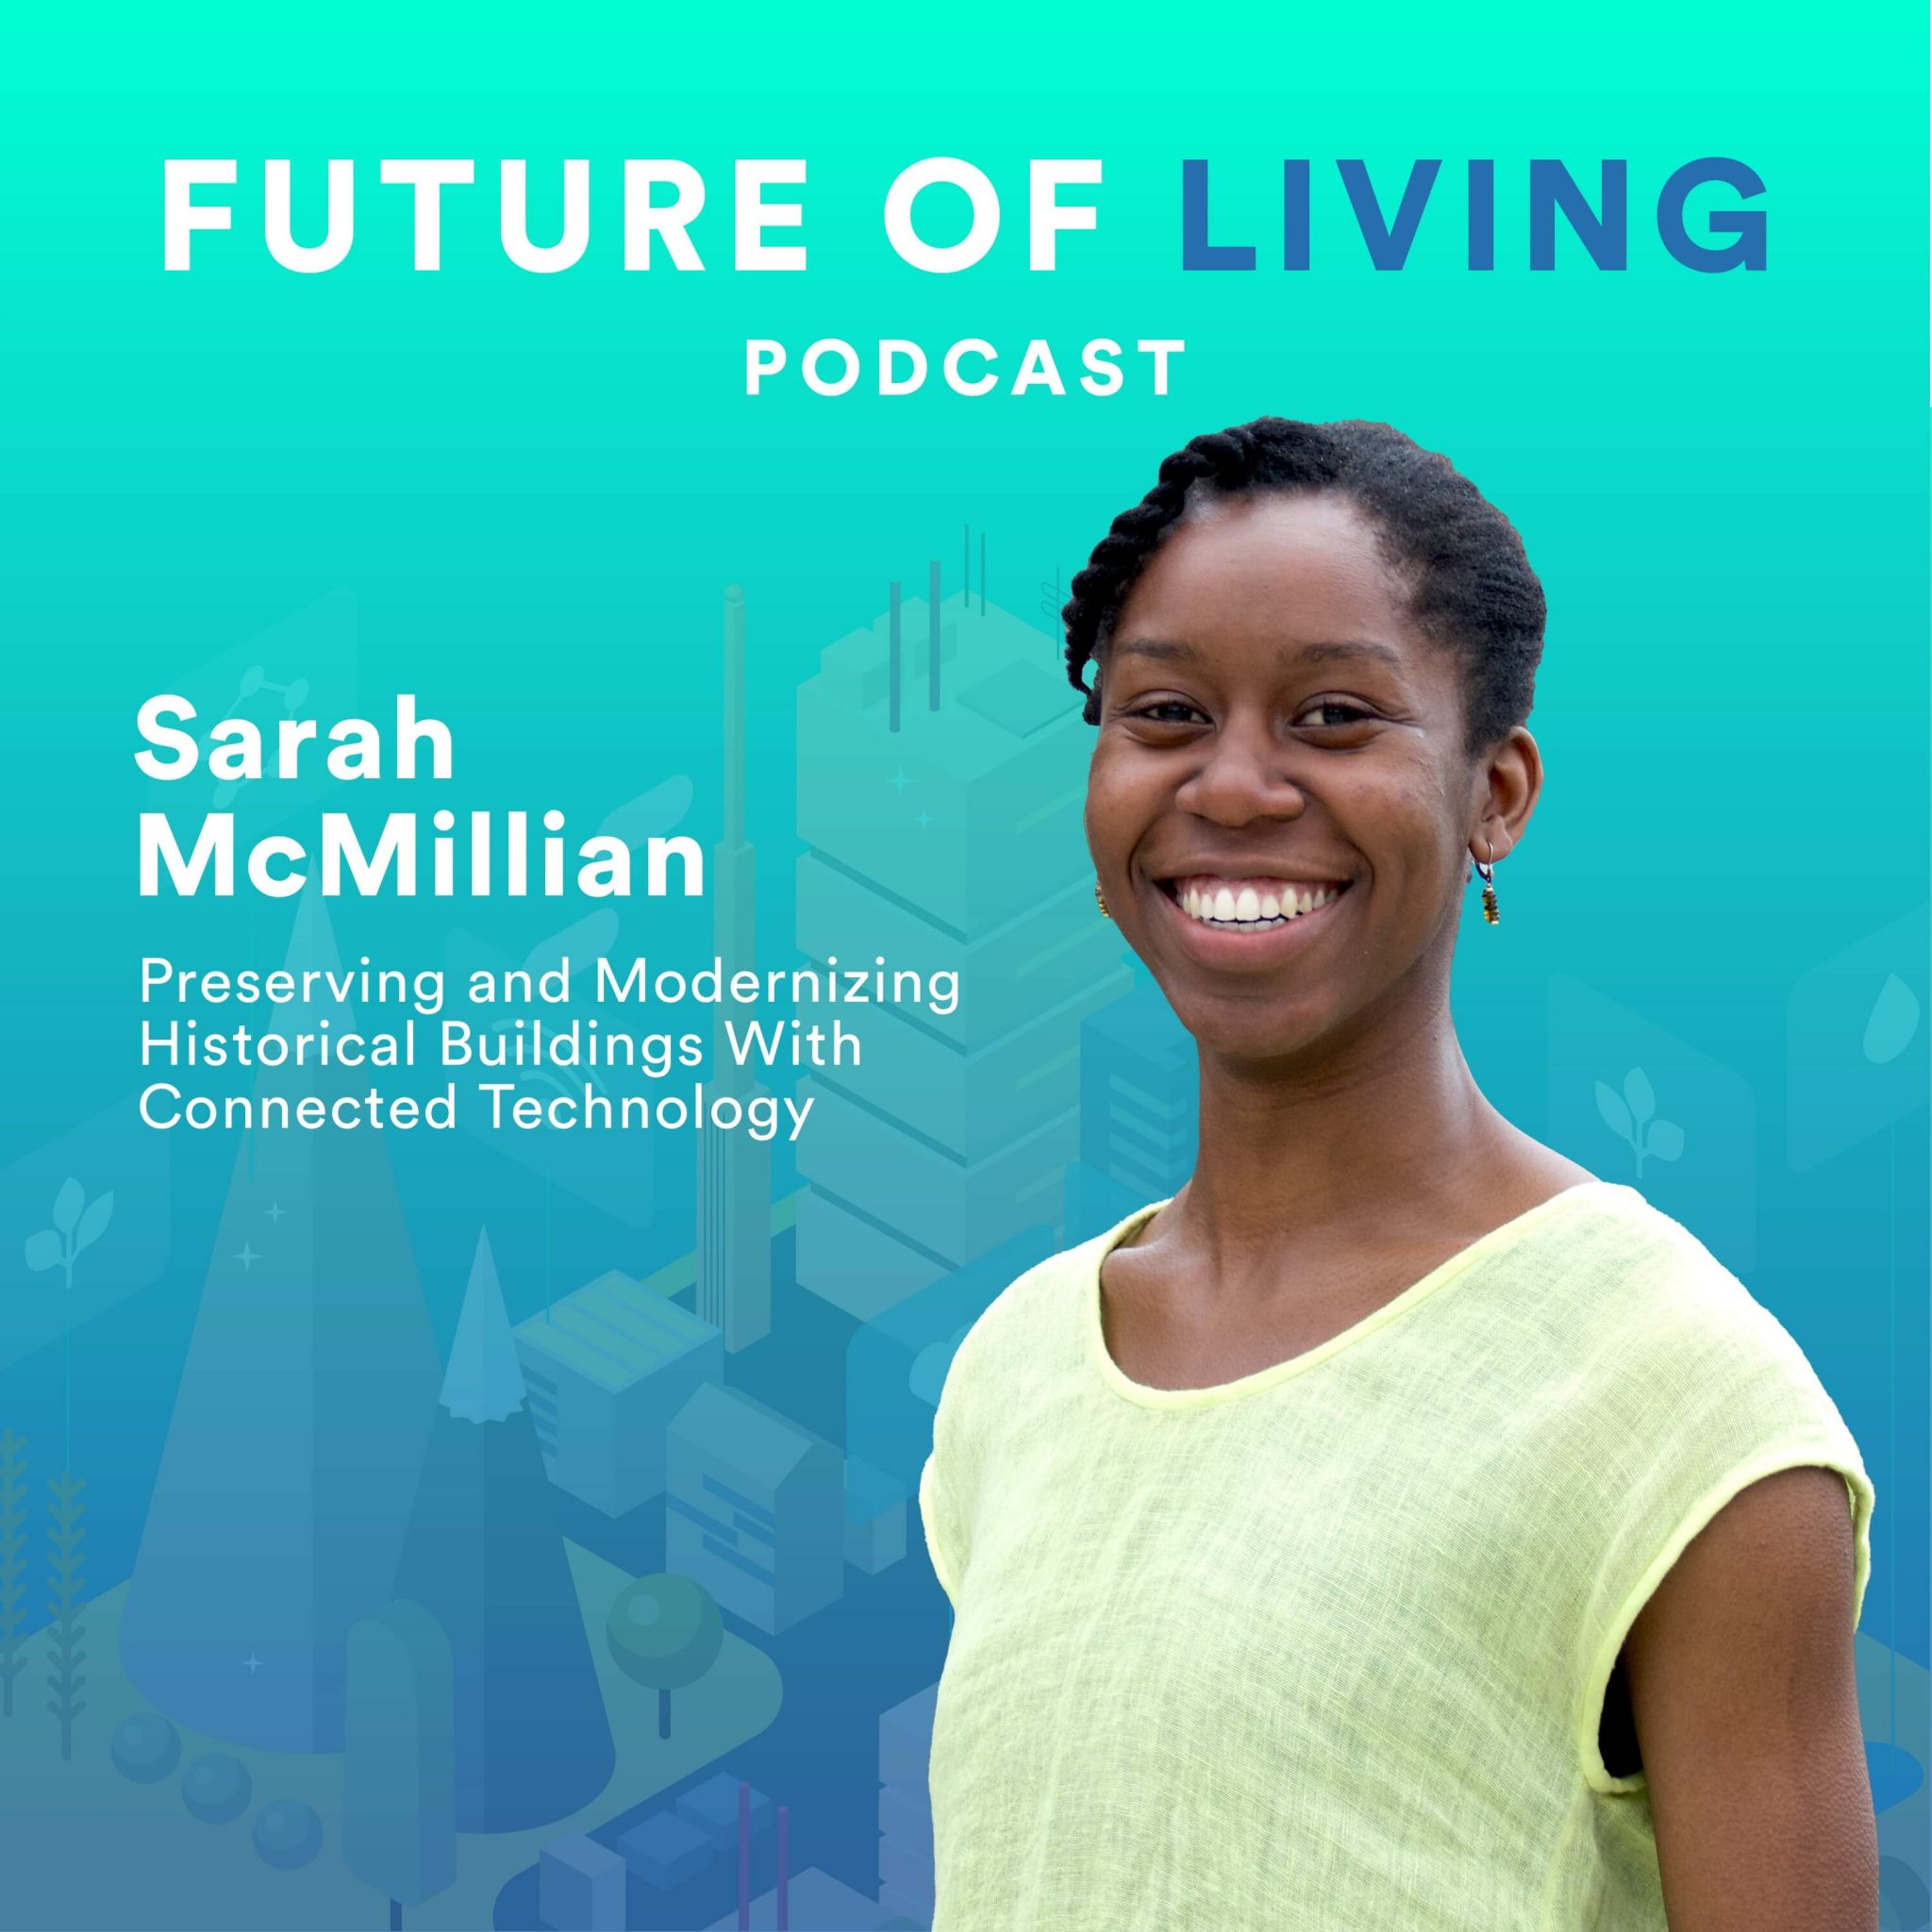 Sarah McMIllian on the Future of Living Podcast with Blake Miller